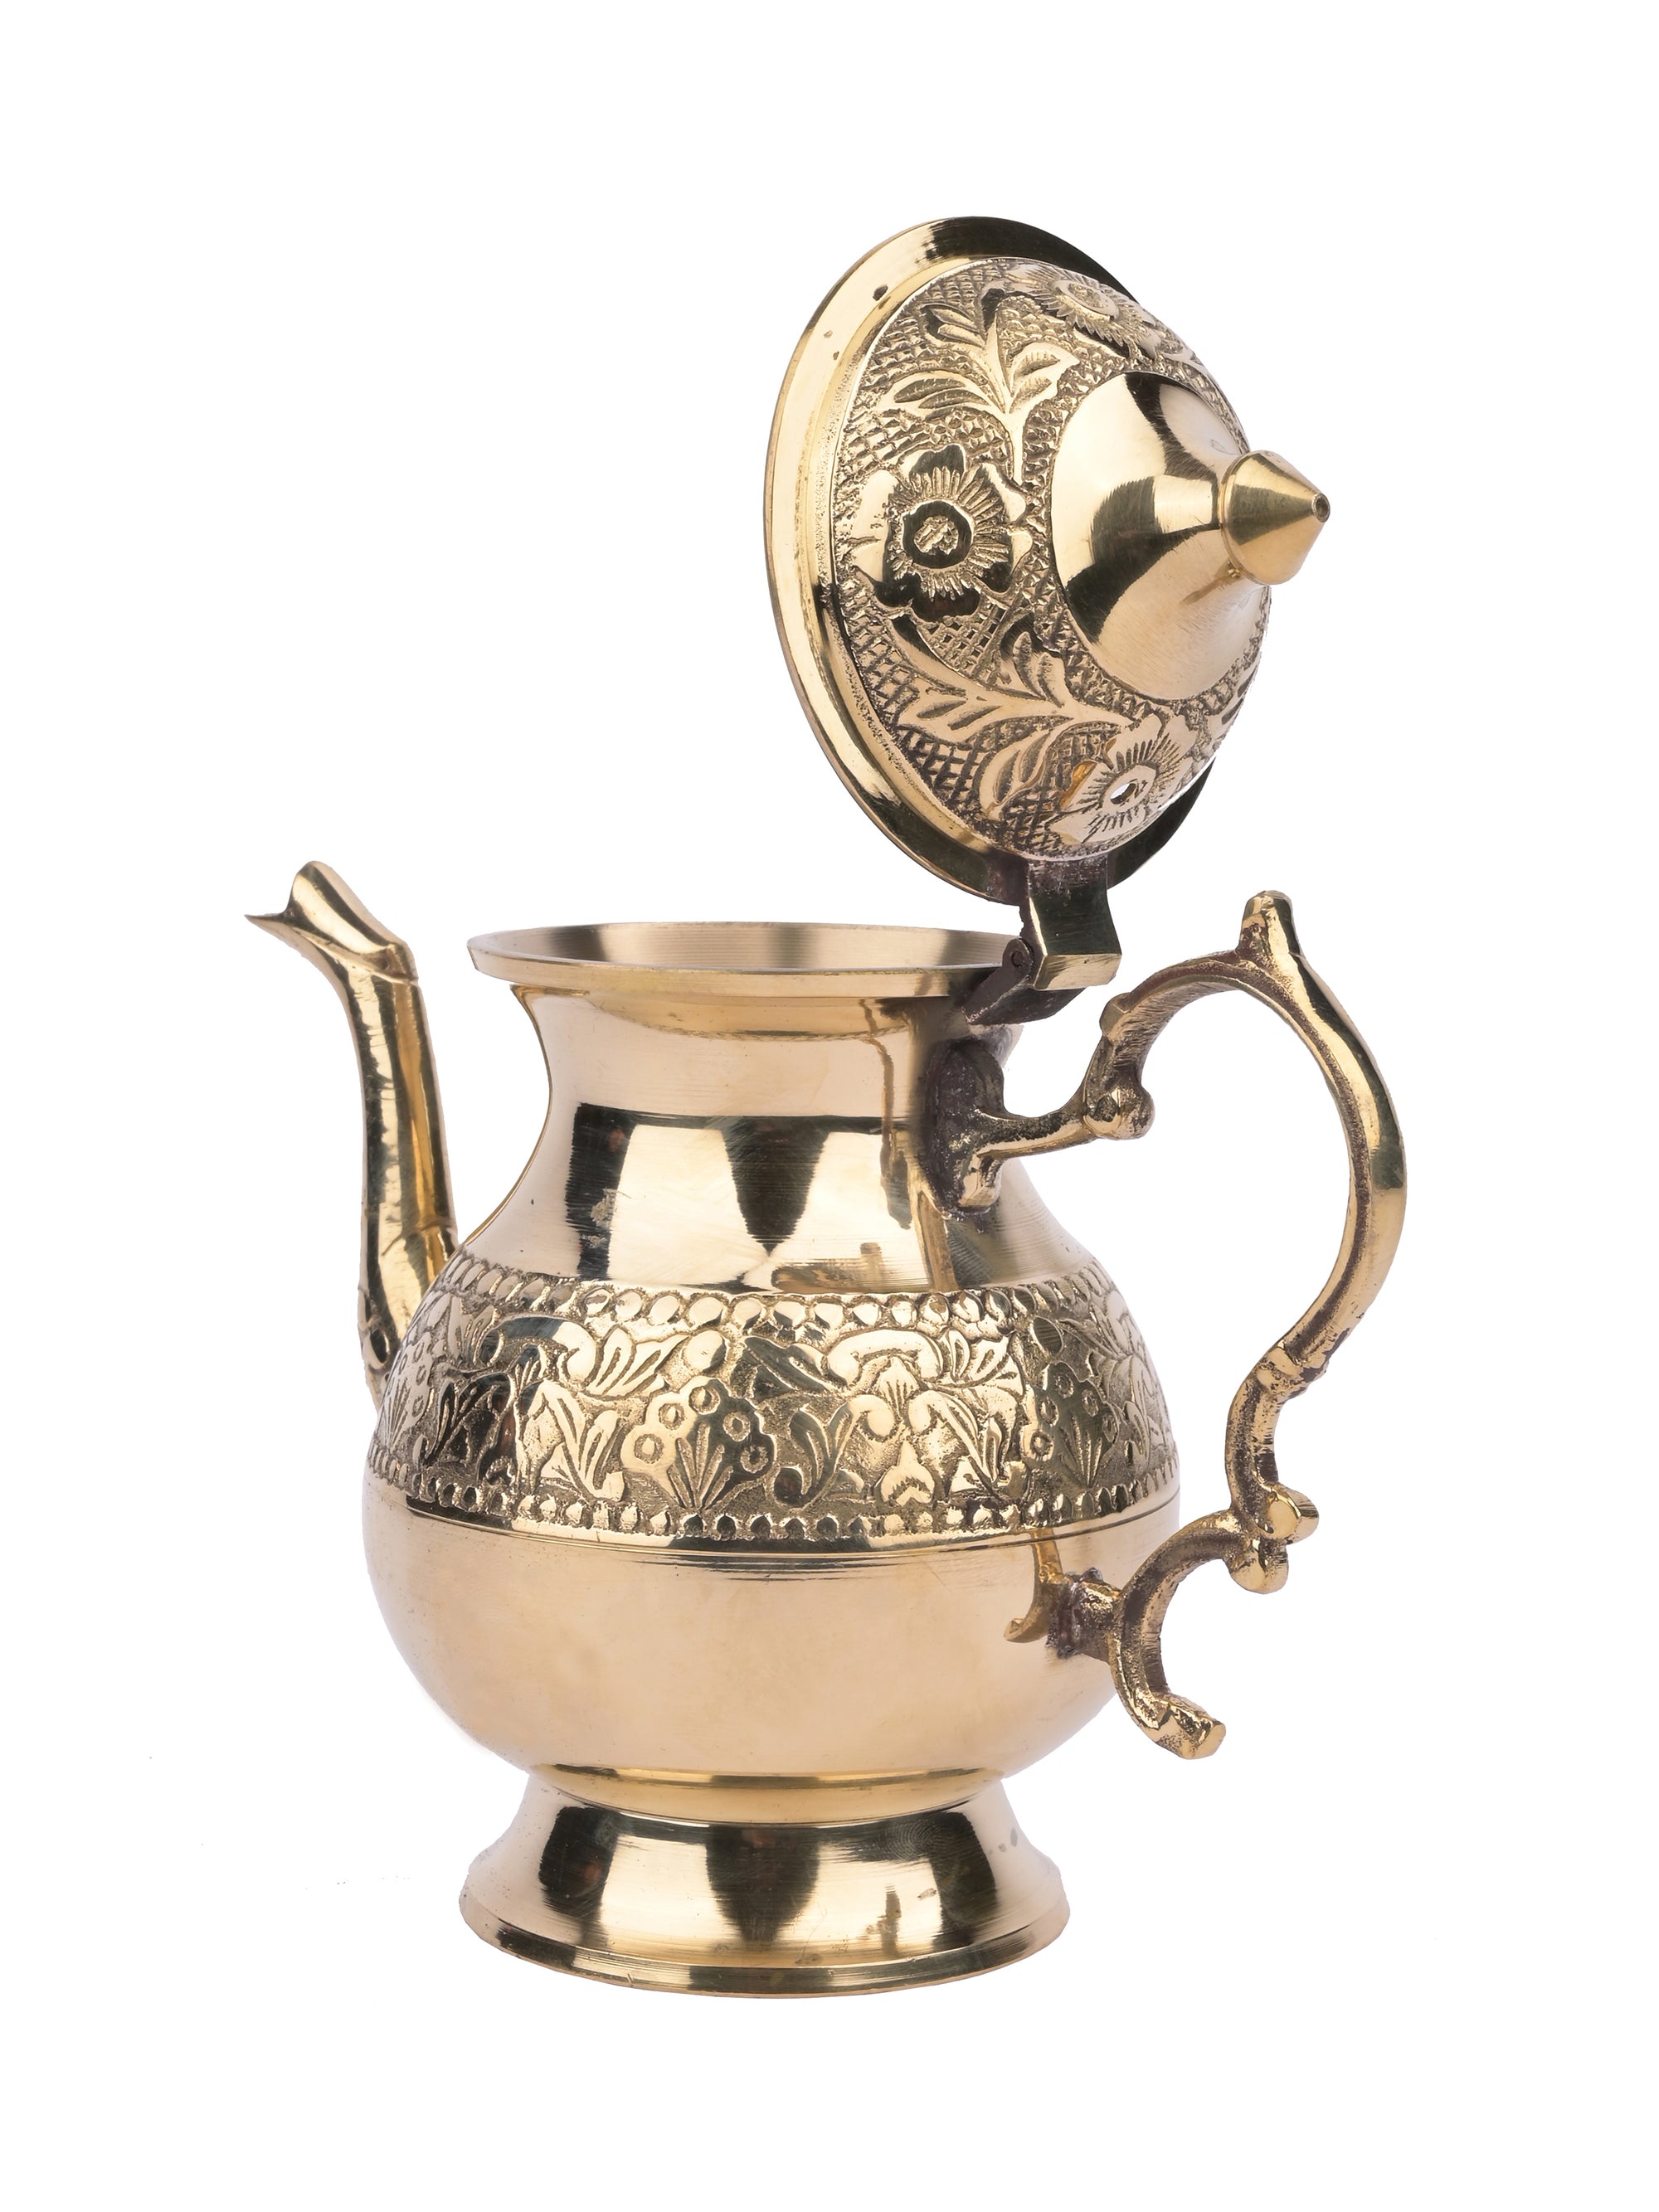 Brass Crafted King Kettle with Lid - 7 inches height - The Heritage Artifacts